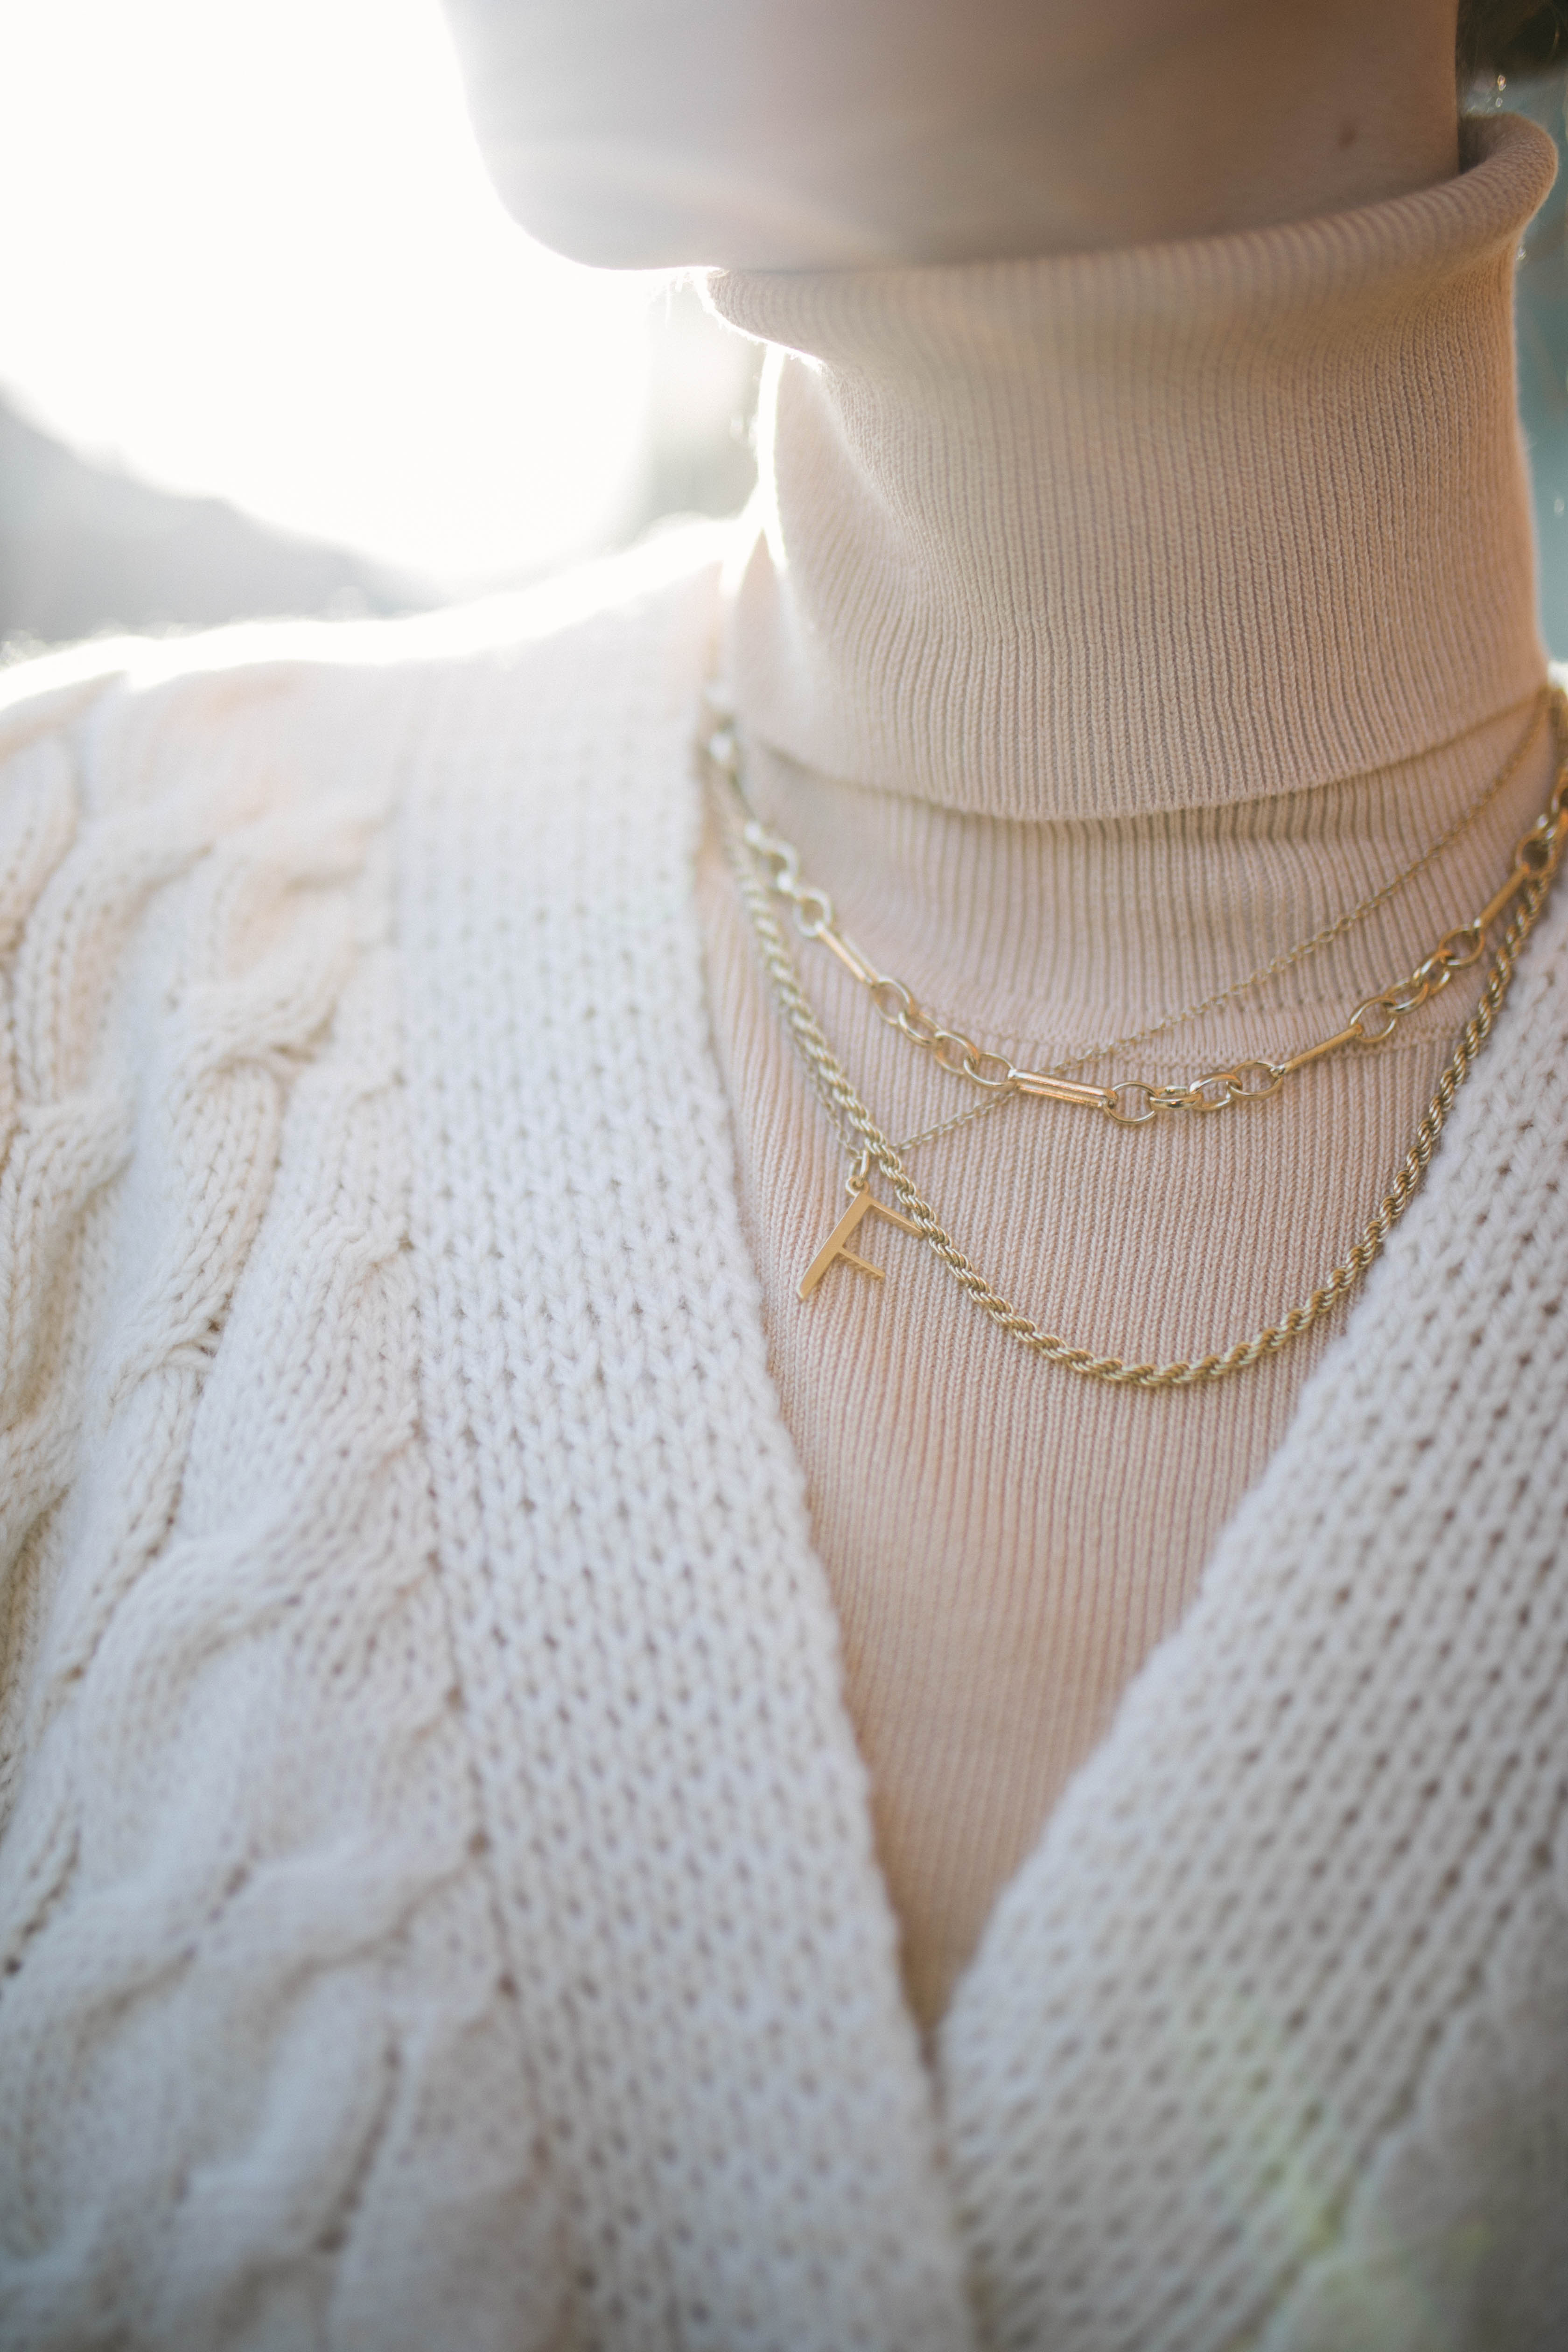 Our Model wearing a chunky white knit cardi and a selection of Antonia Guise Necklaces 